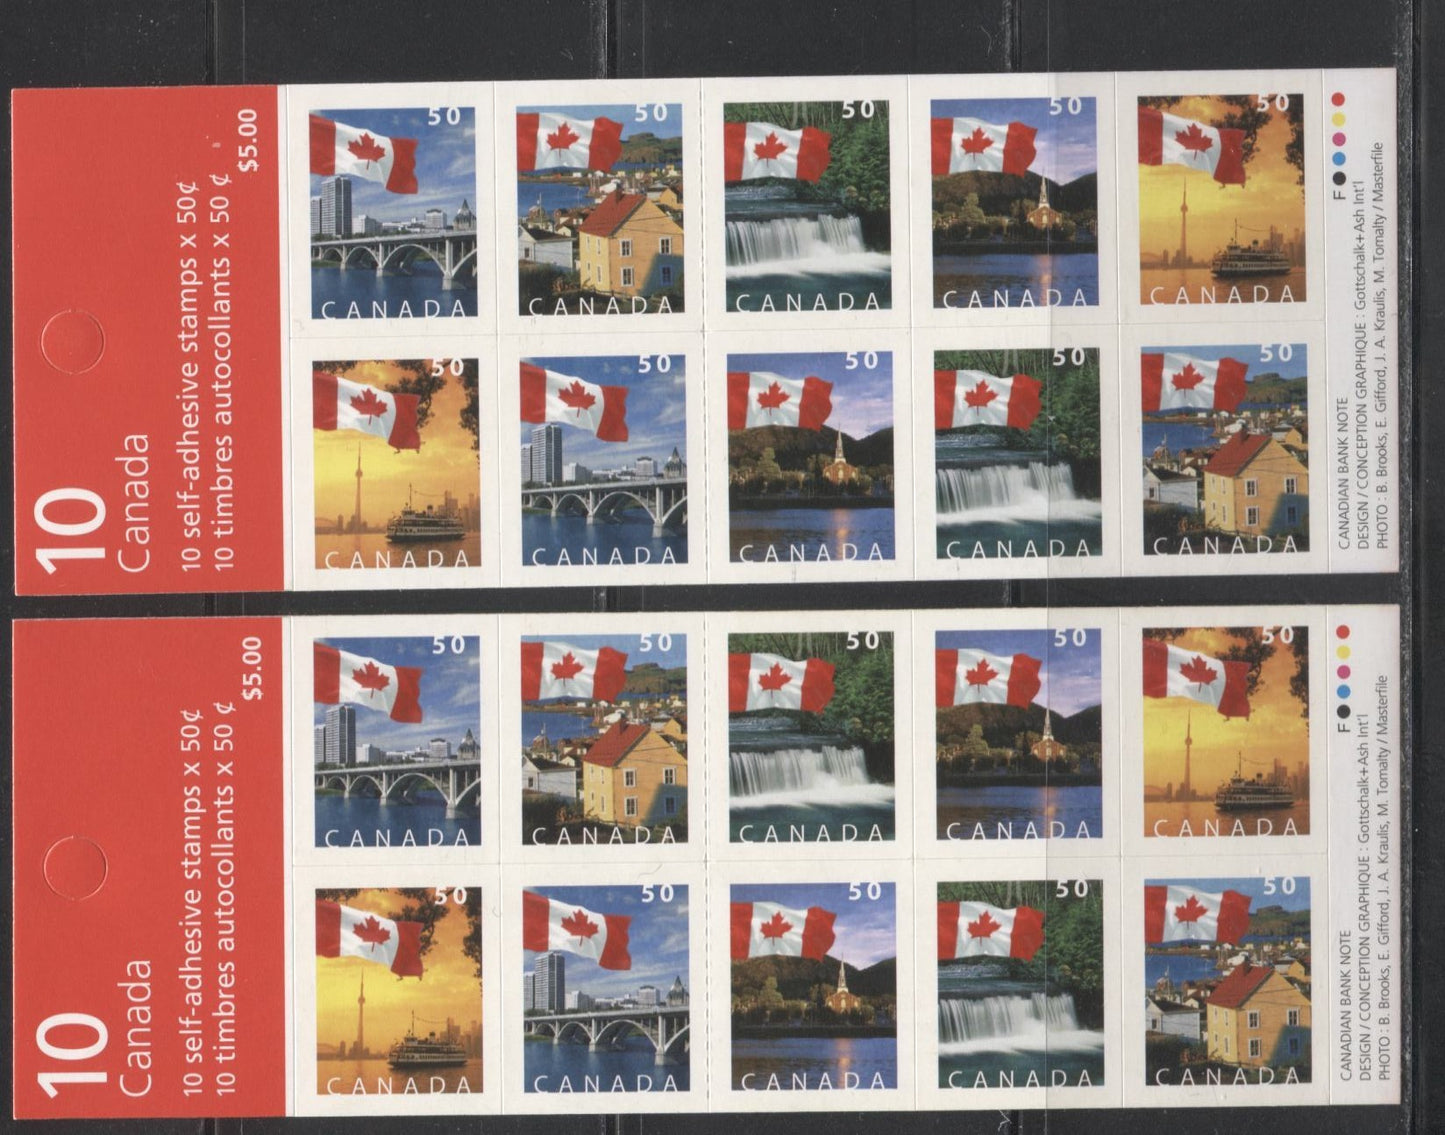 Canada #BK302b 2004-2005 Flag Over Canada Definitive Issue, Two Complete $5 Booklets, Tullis Russell Coatings Paper, Dead/High Fluorescent Paper, 4 mm GT-4 Tagging, Narrow Roulette - 29 Slits, Covers QB and AA